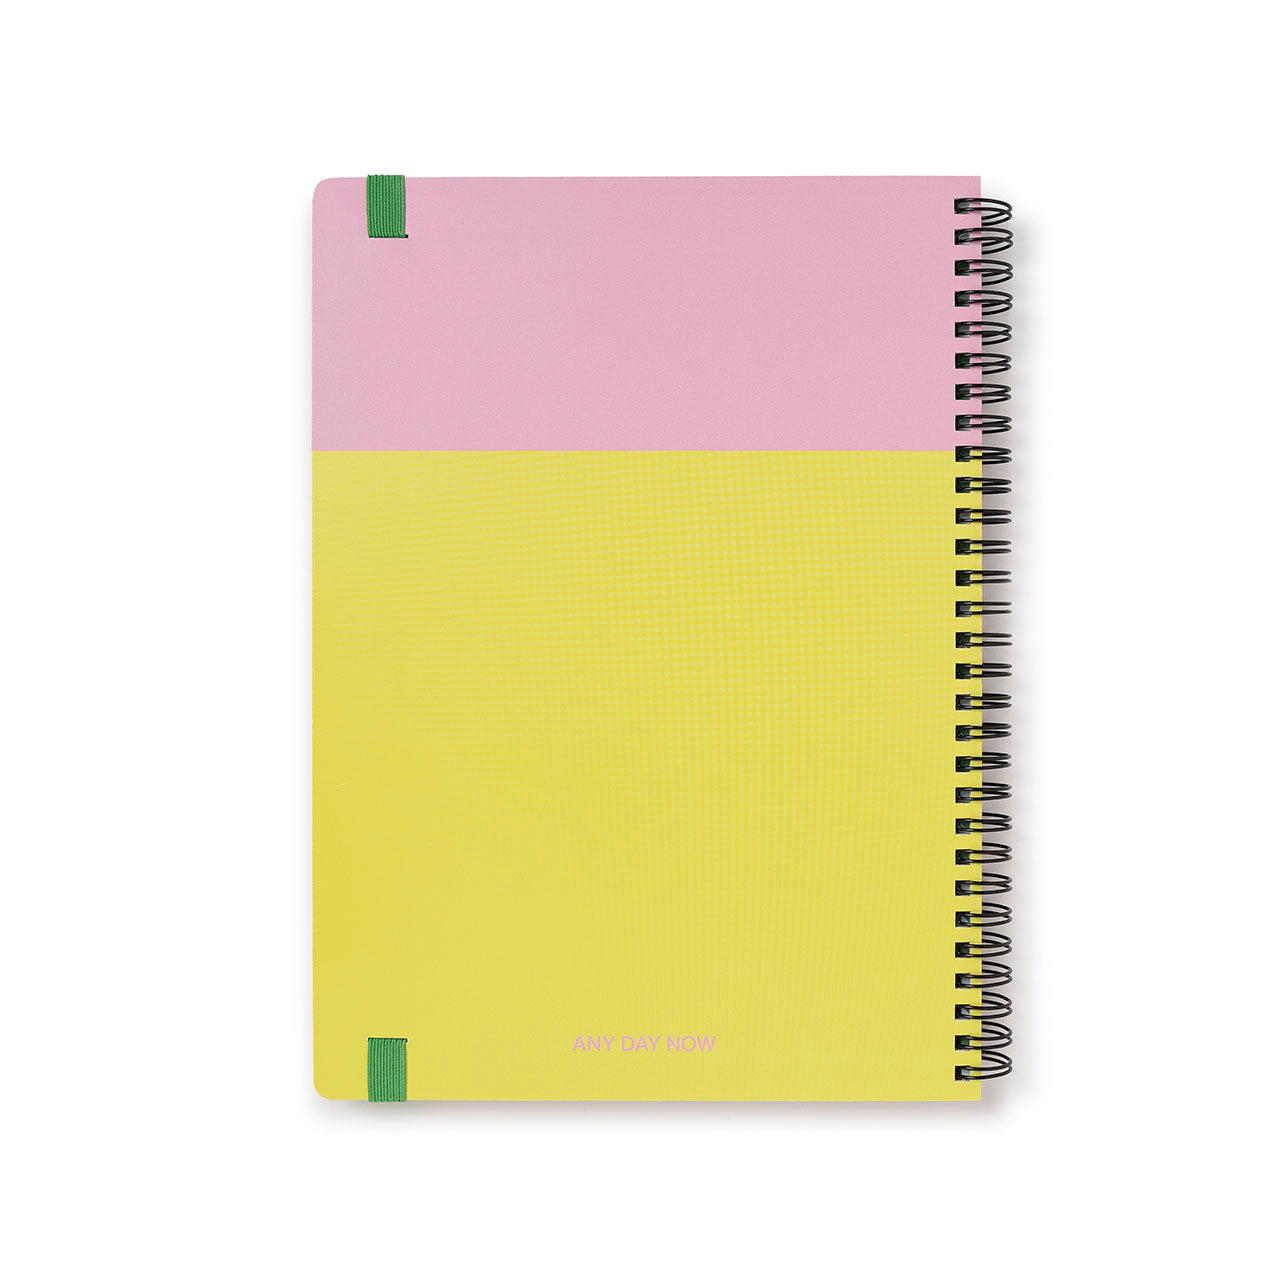 Any Day Now Spiral Notebook B5 Dot Grid Sky and Green – Milligram